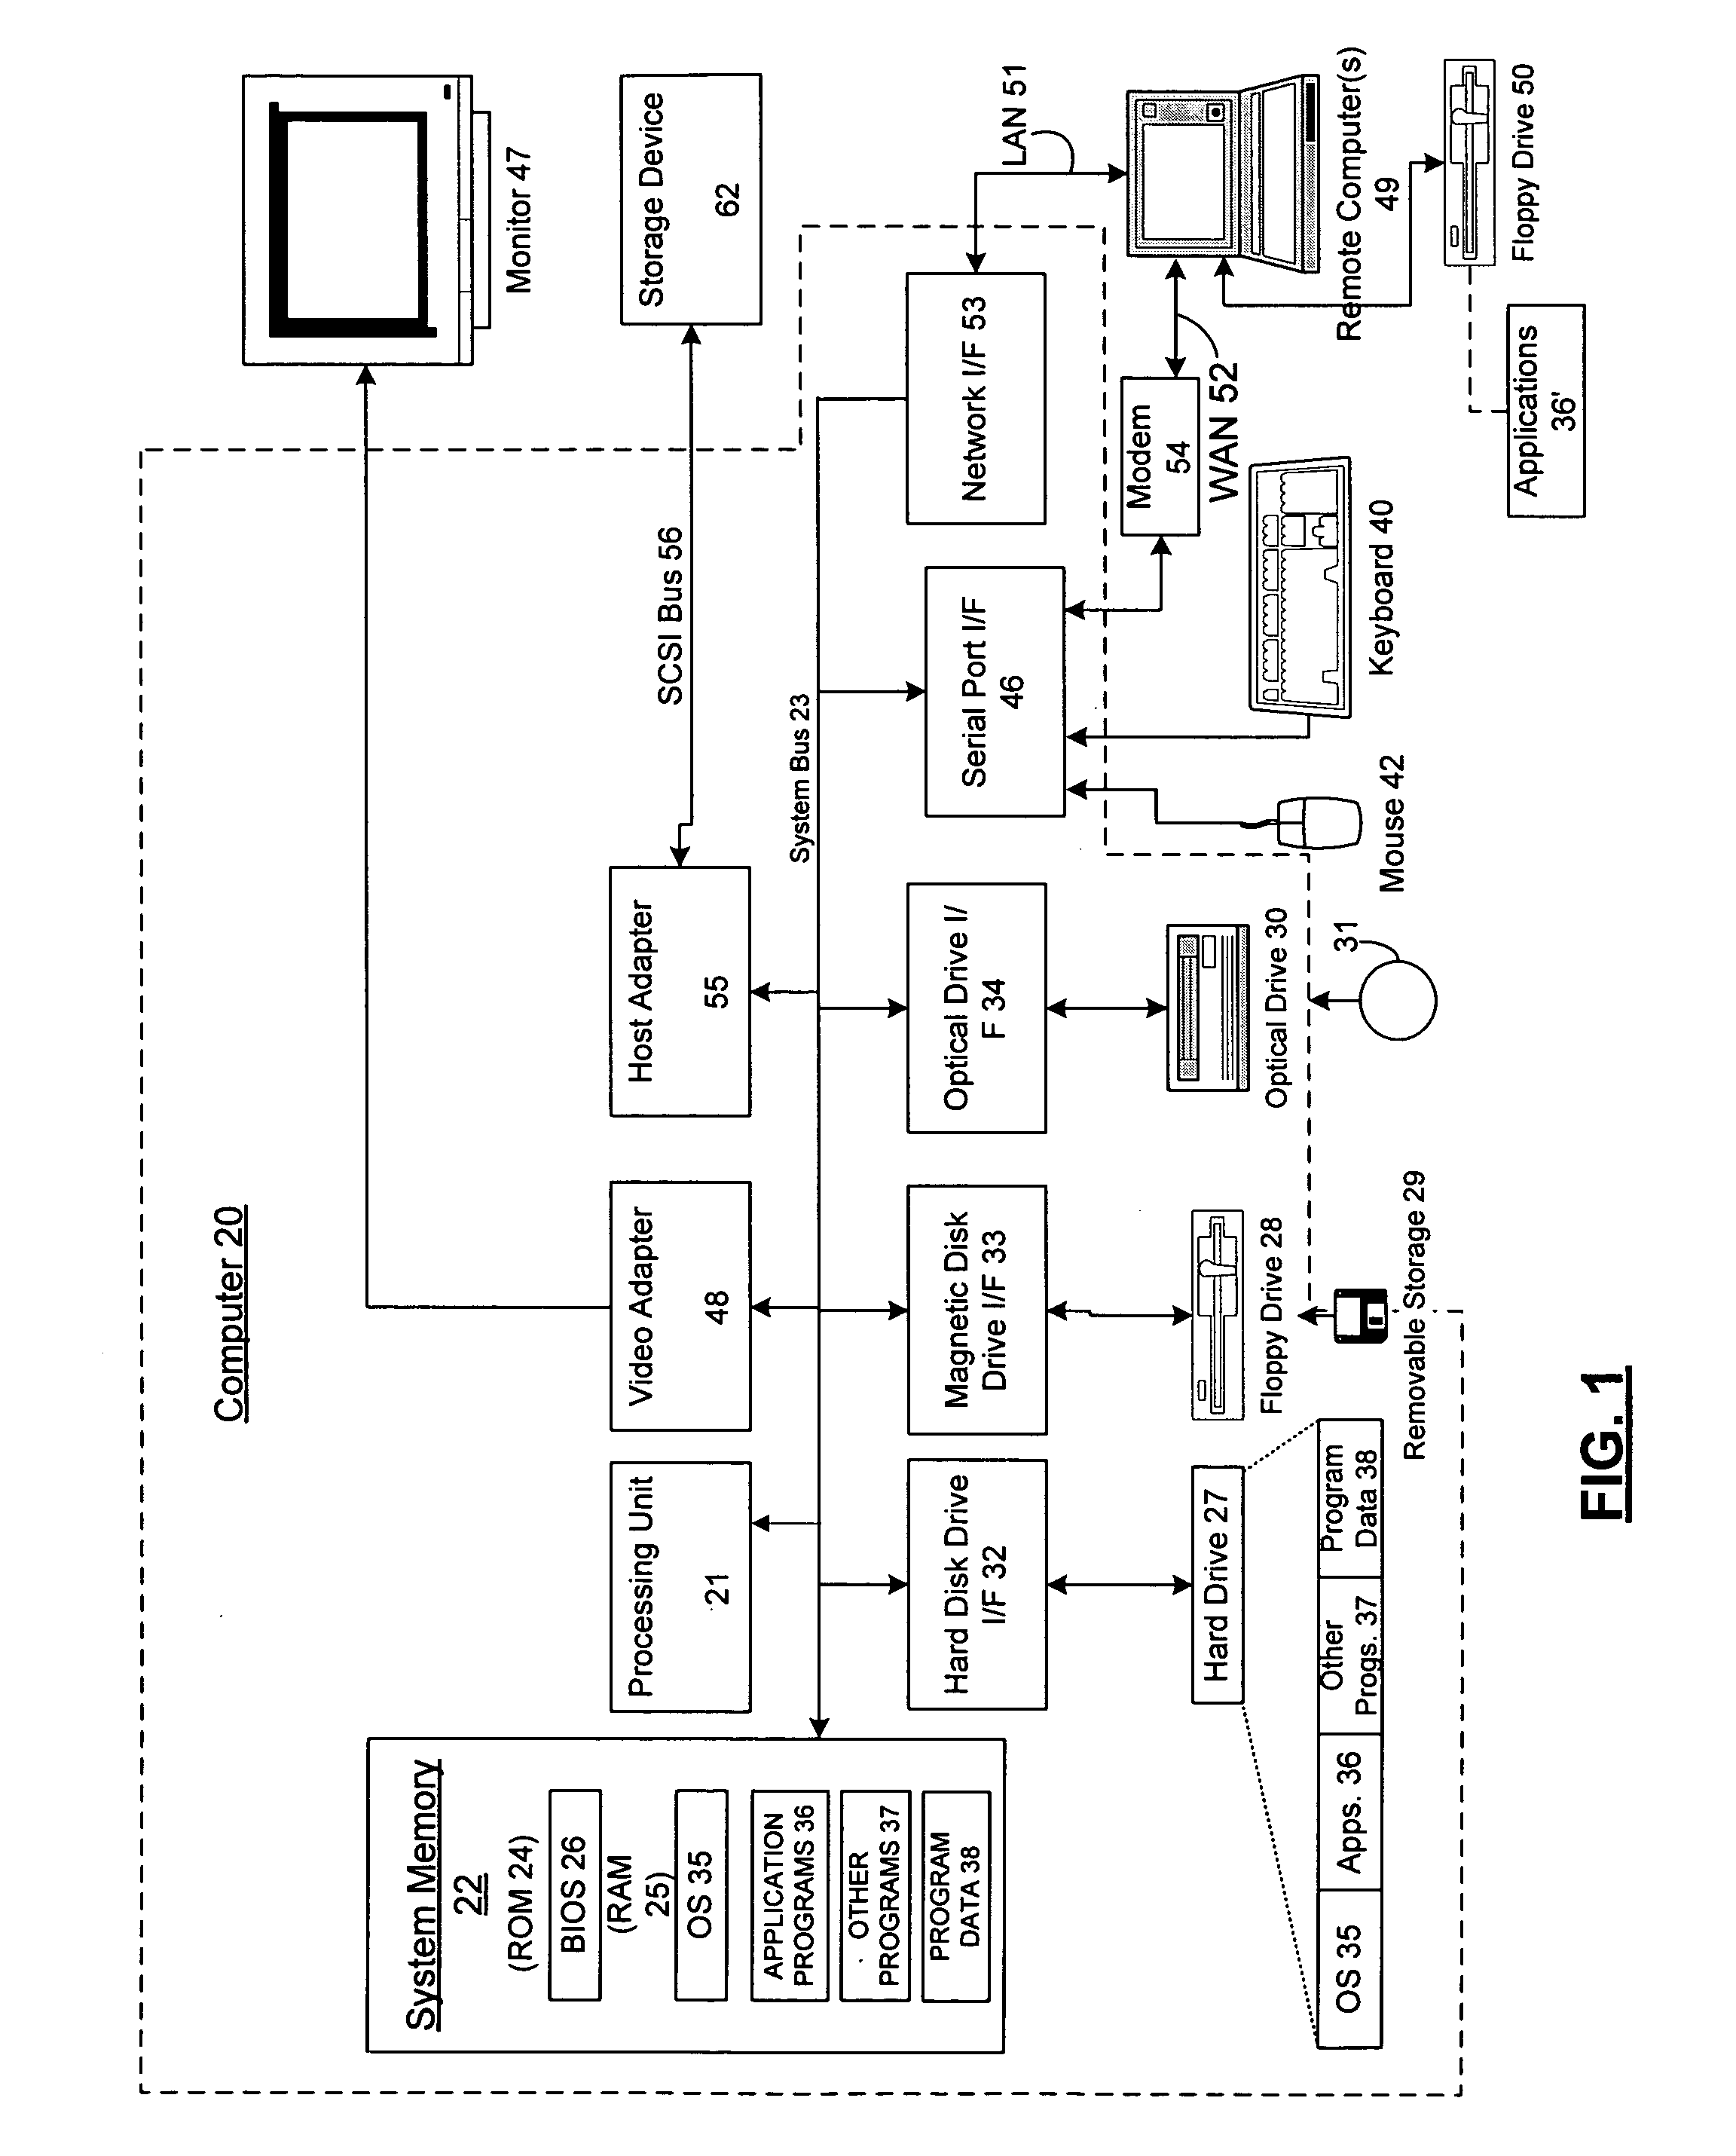 Systems and methods for a disaster recovery system utilizing virtual machines running on at least two host computers in physically different locations